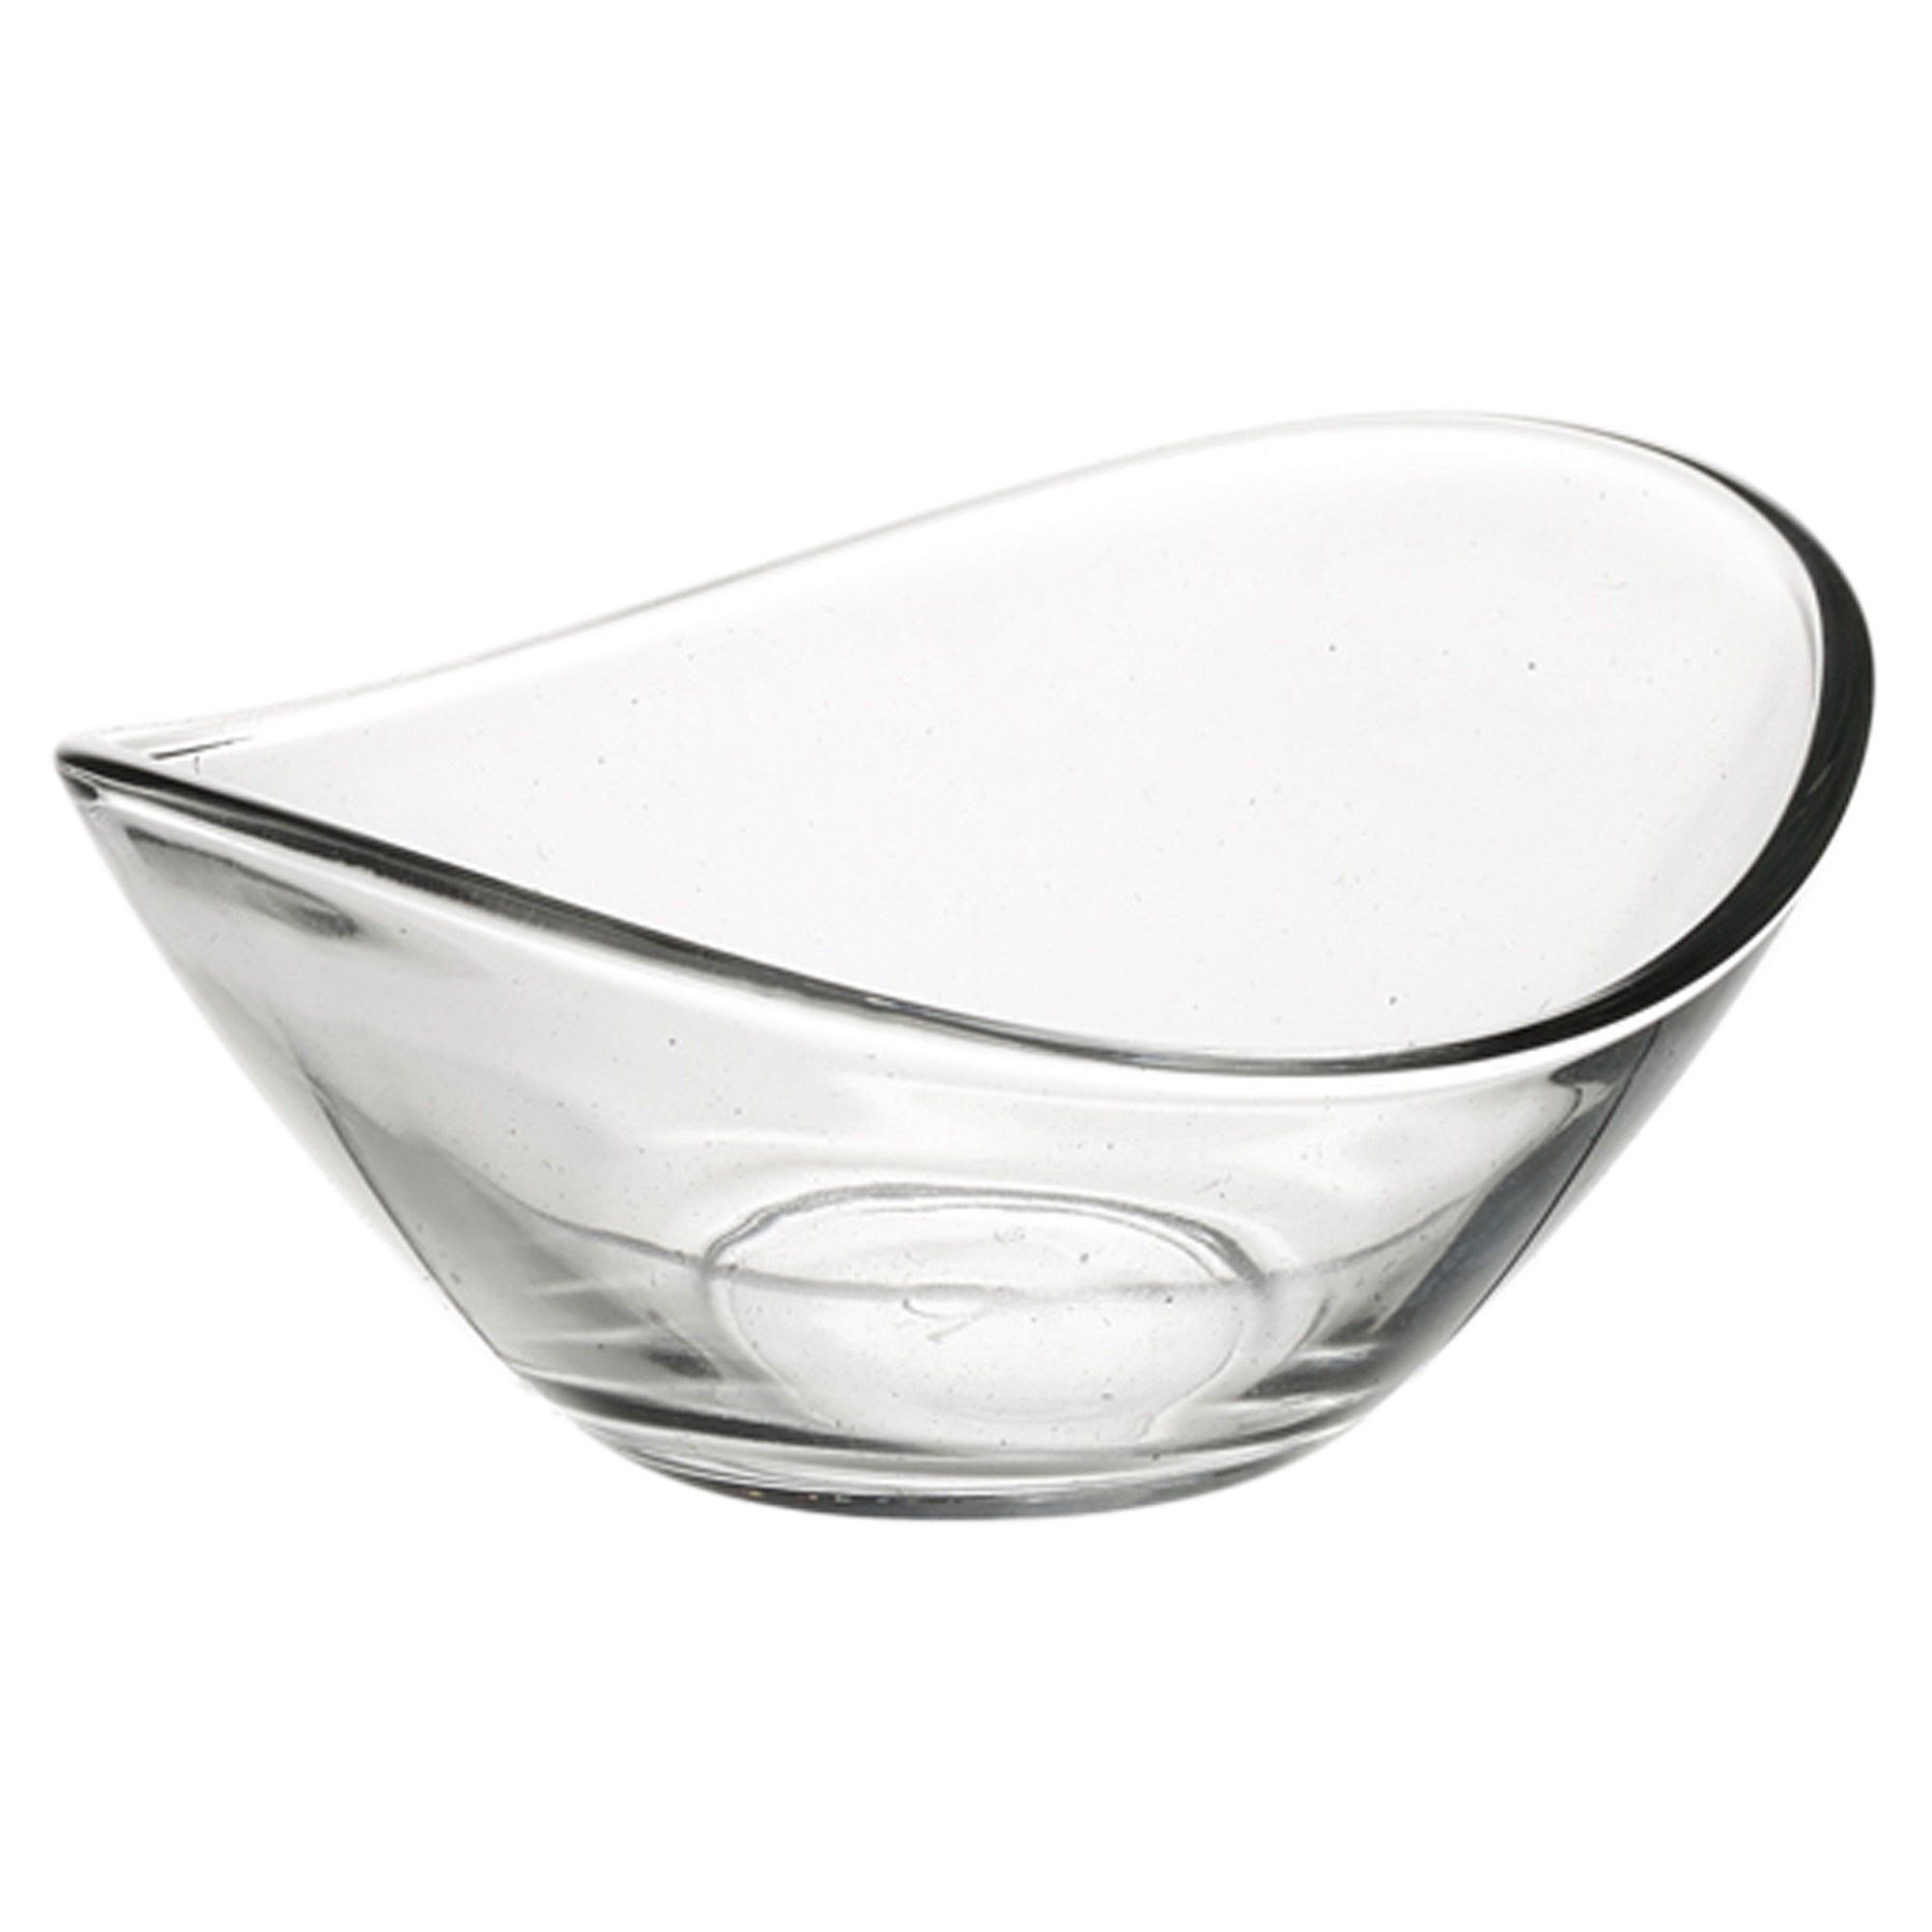 Glass Dessert Bowls
 6 x Pasabahce Small Clear Glass Curved Dessert Bowls Ice